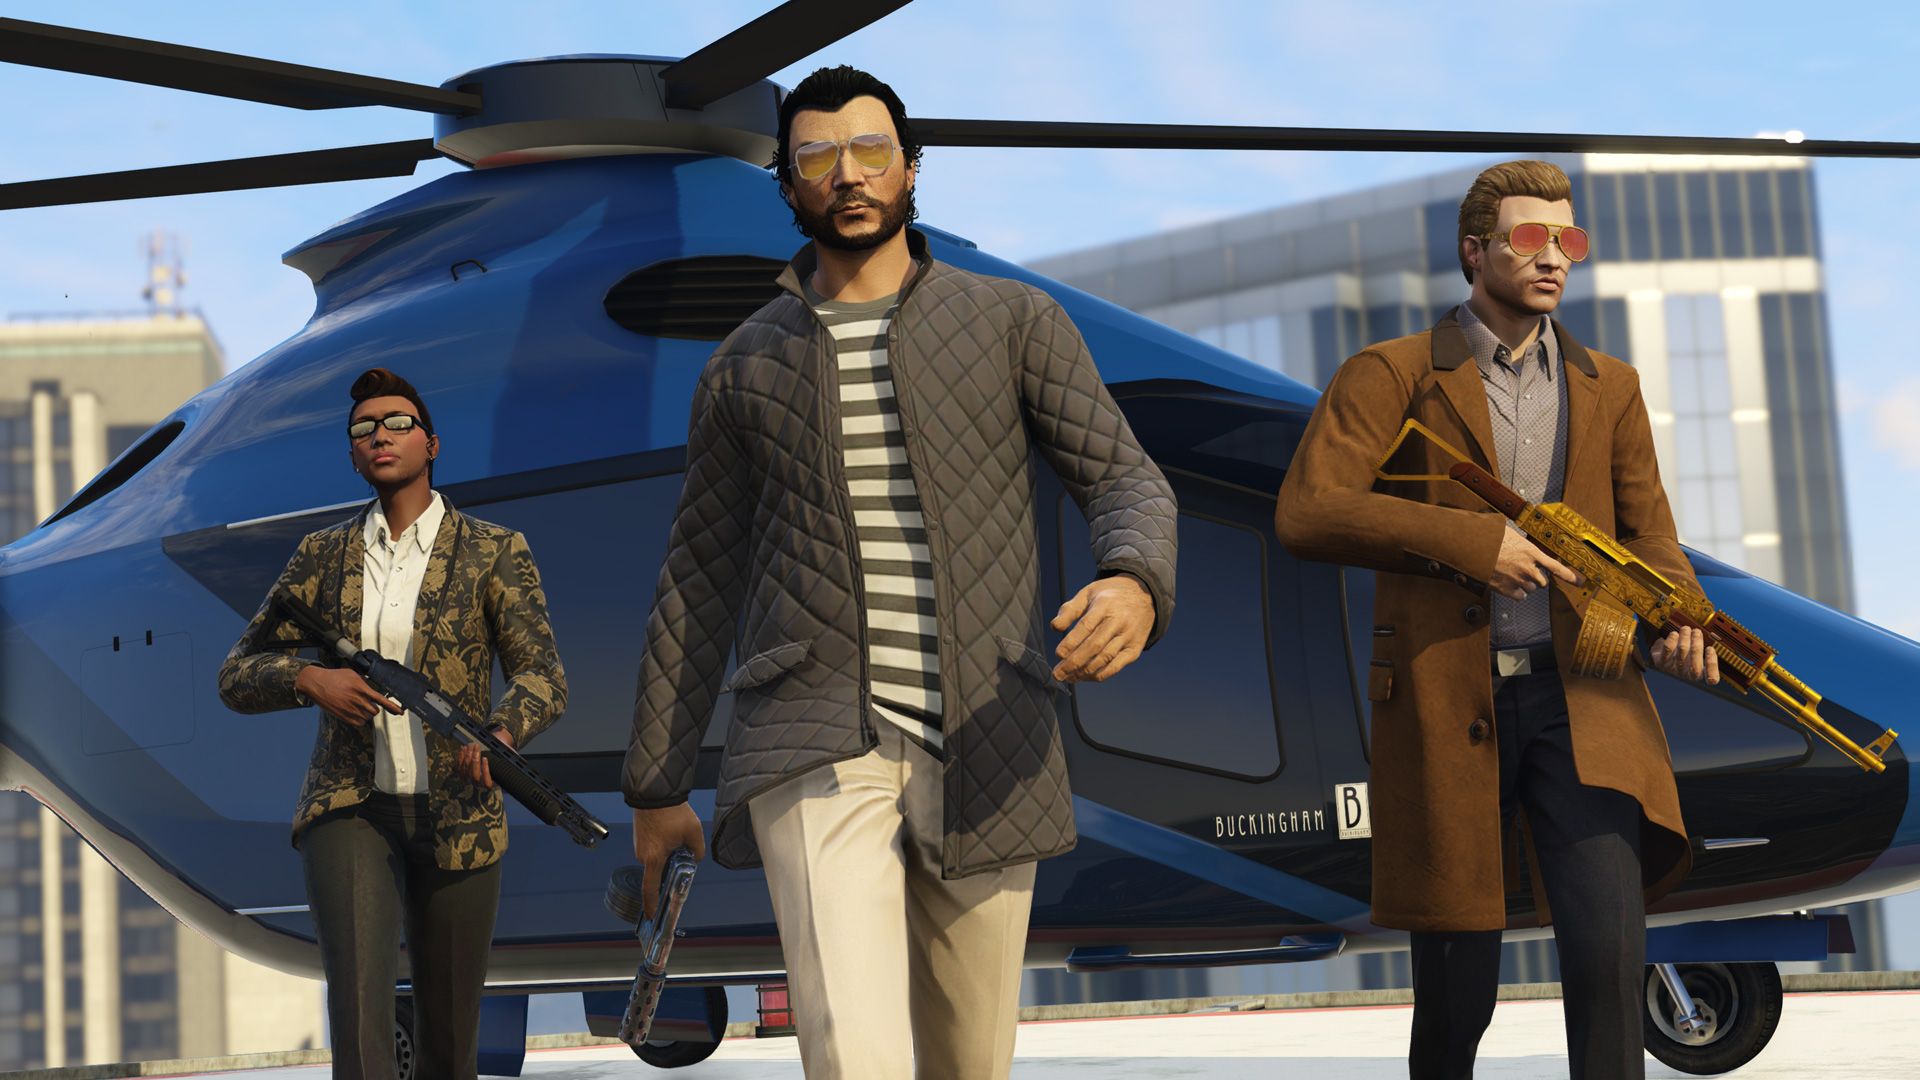 How To Play GTA Online: A Quick Start Guide To Acquiring Cash, Vehicles And Property